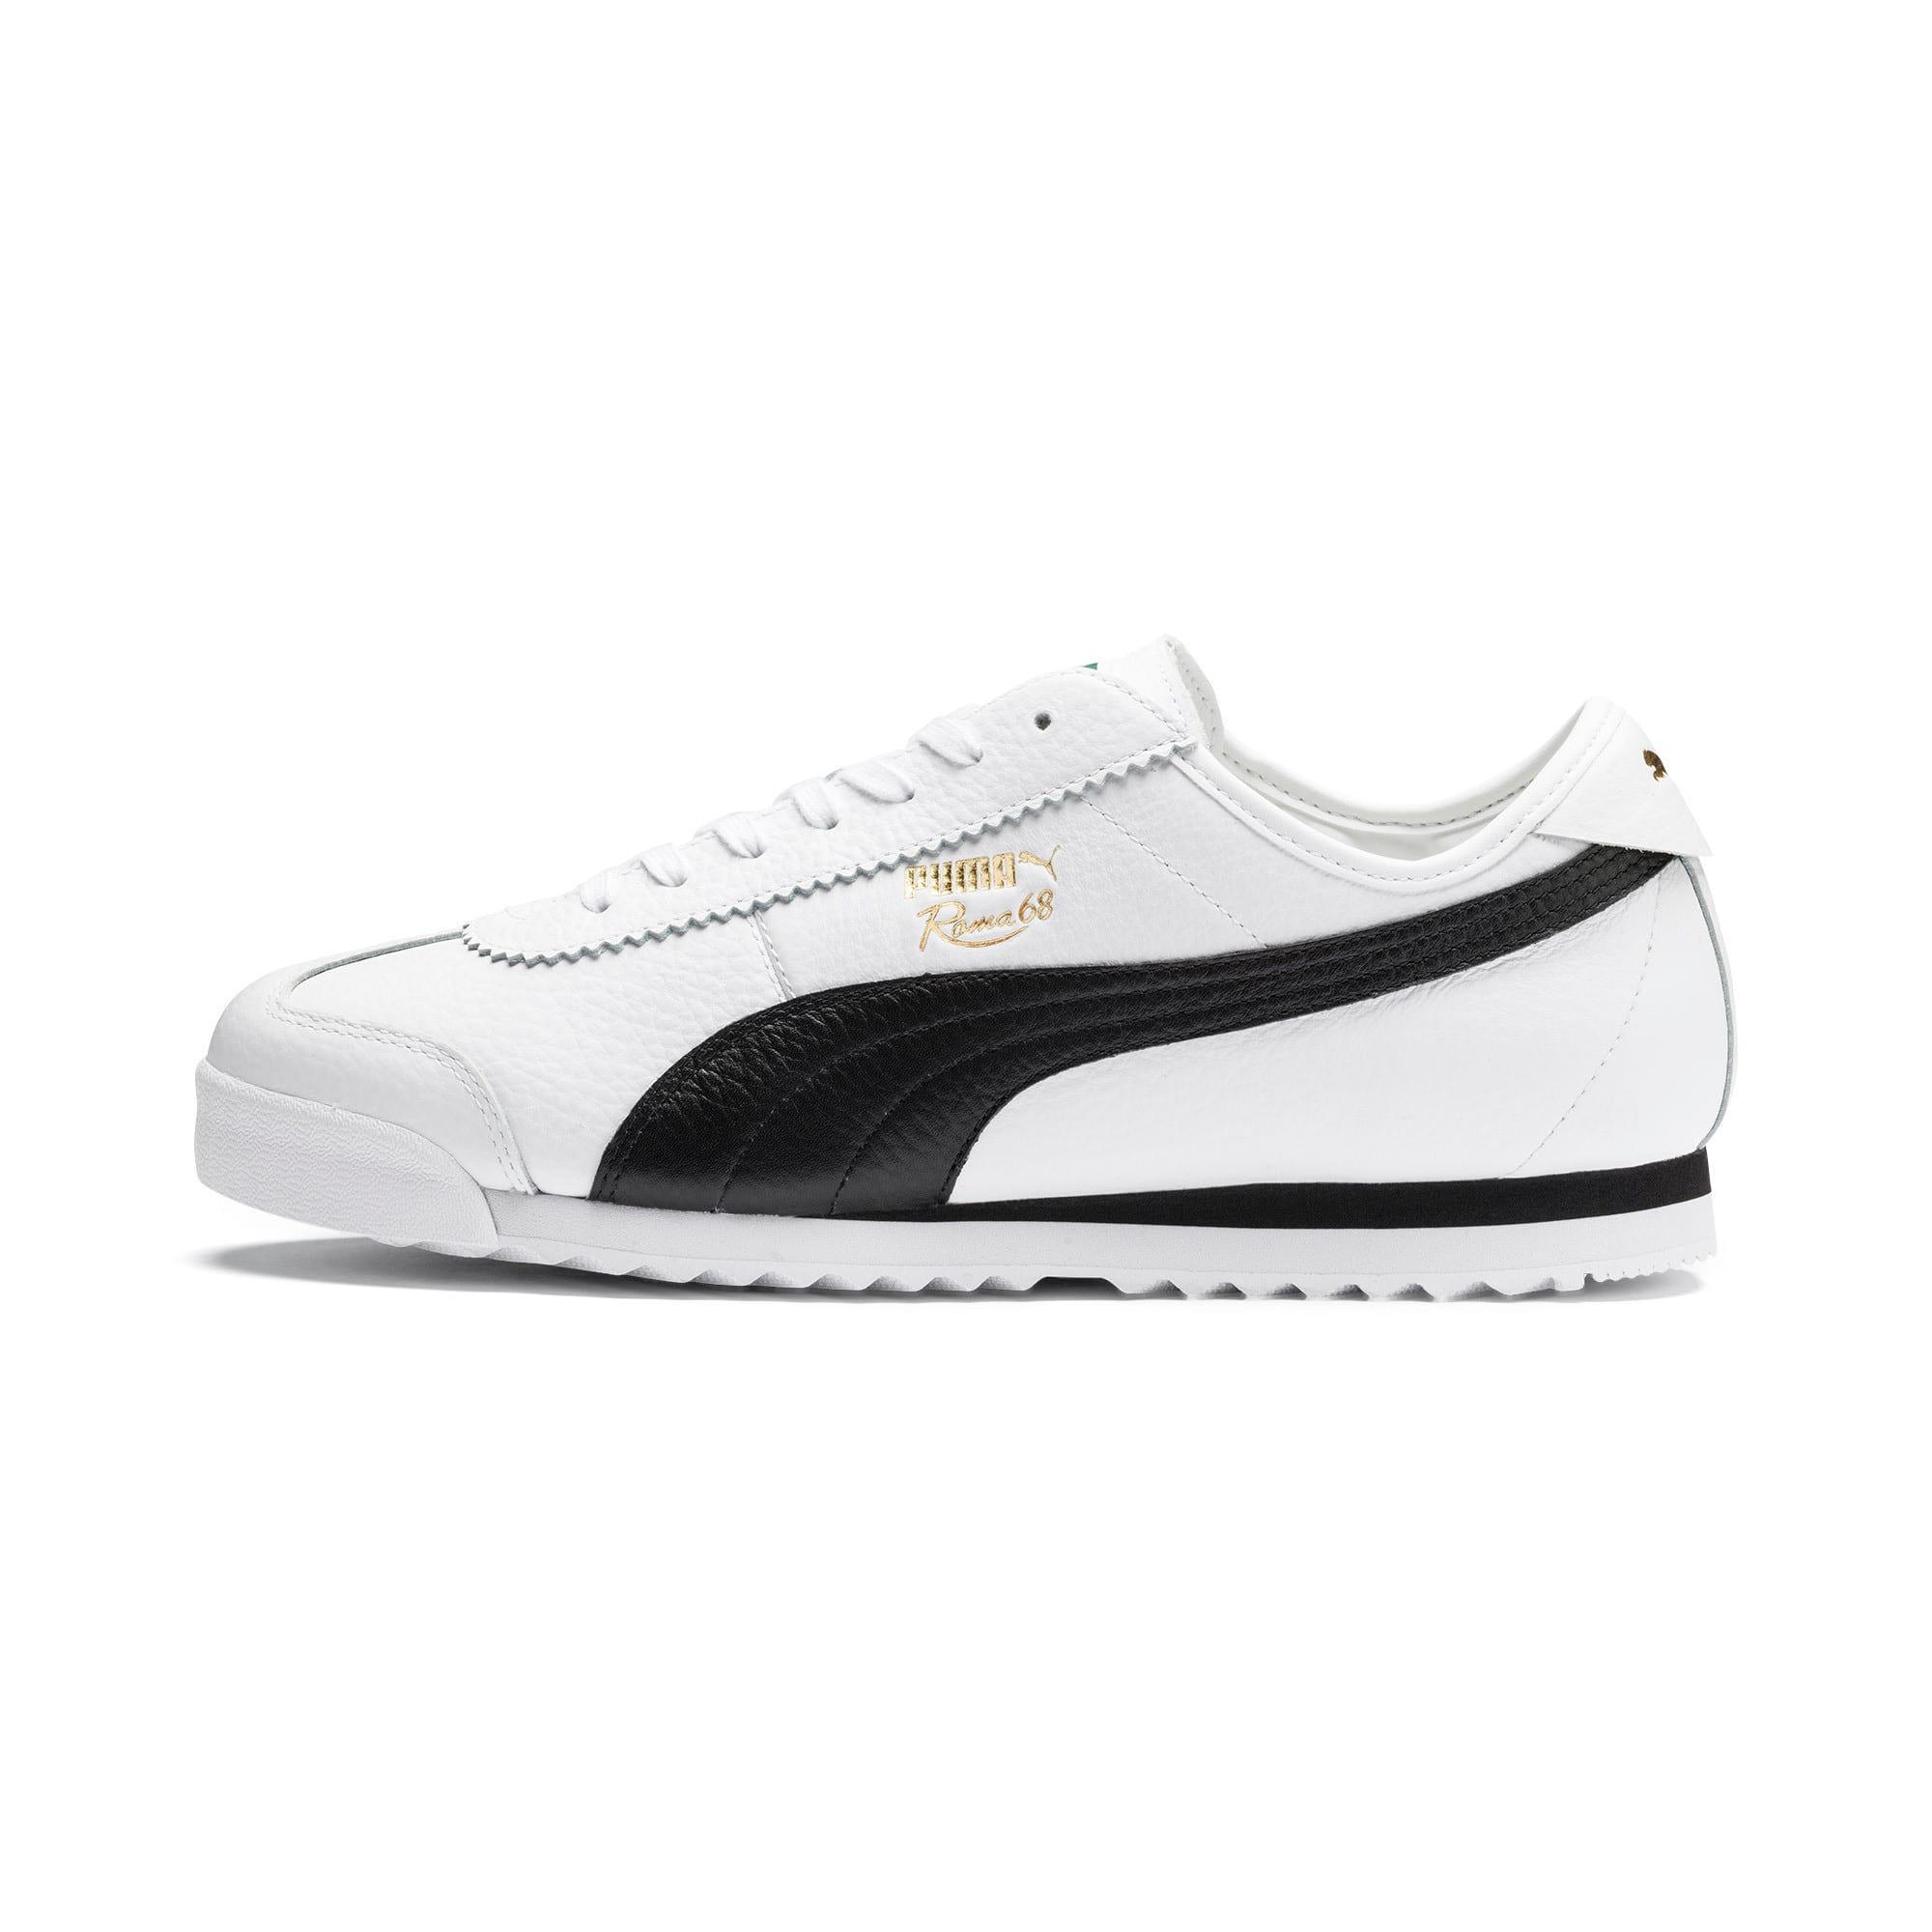 PUMA Leather Roma '68 Vintage Sneakers in White - Lyst